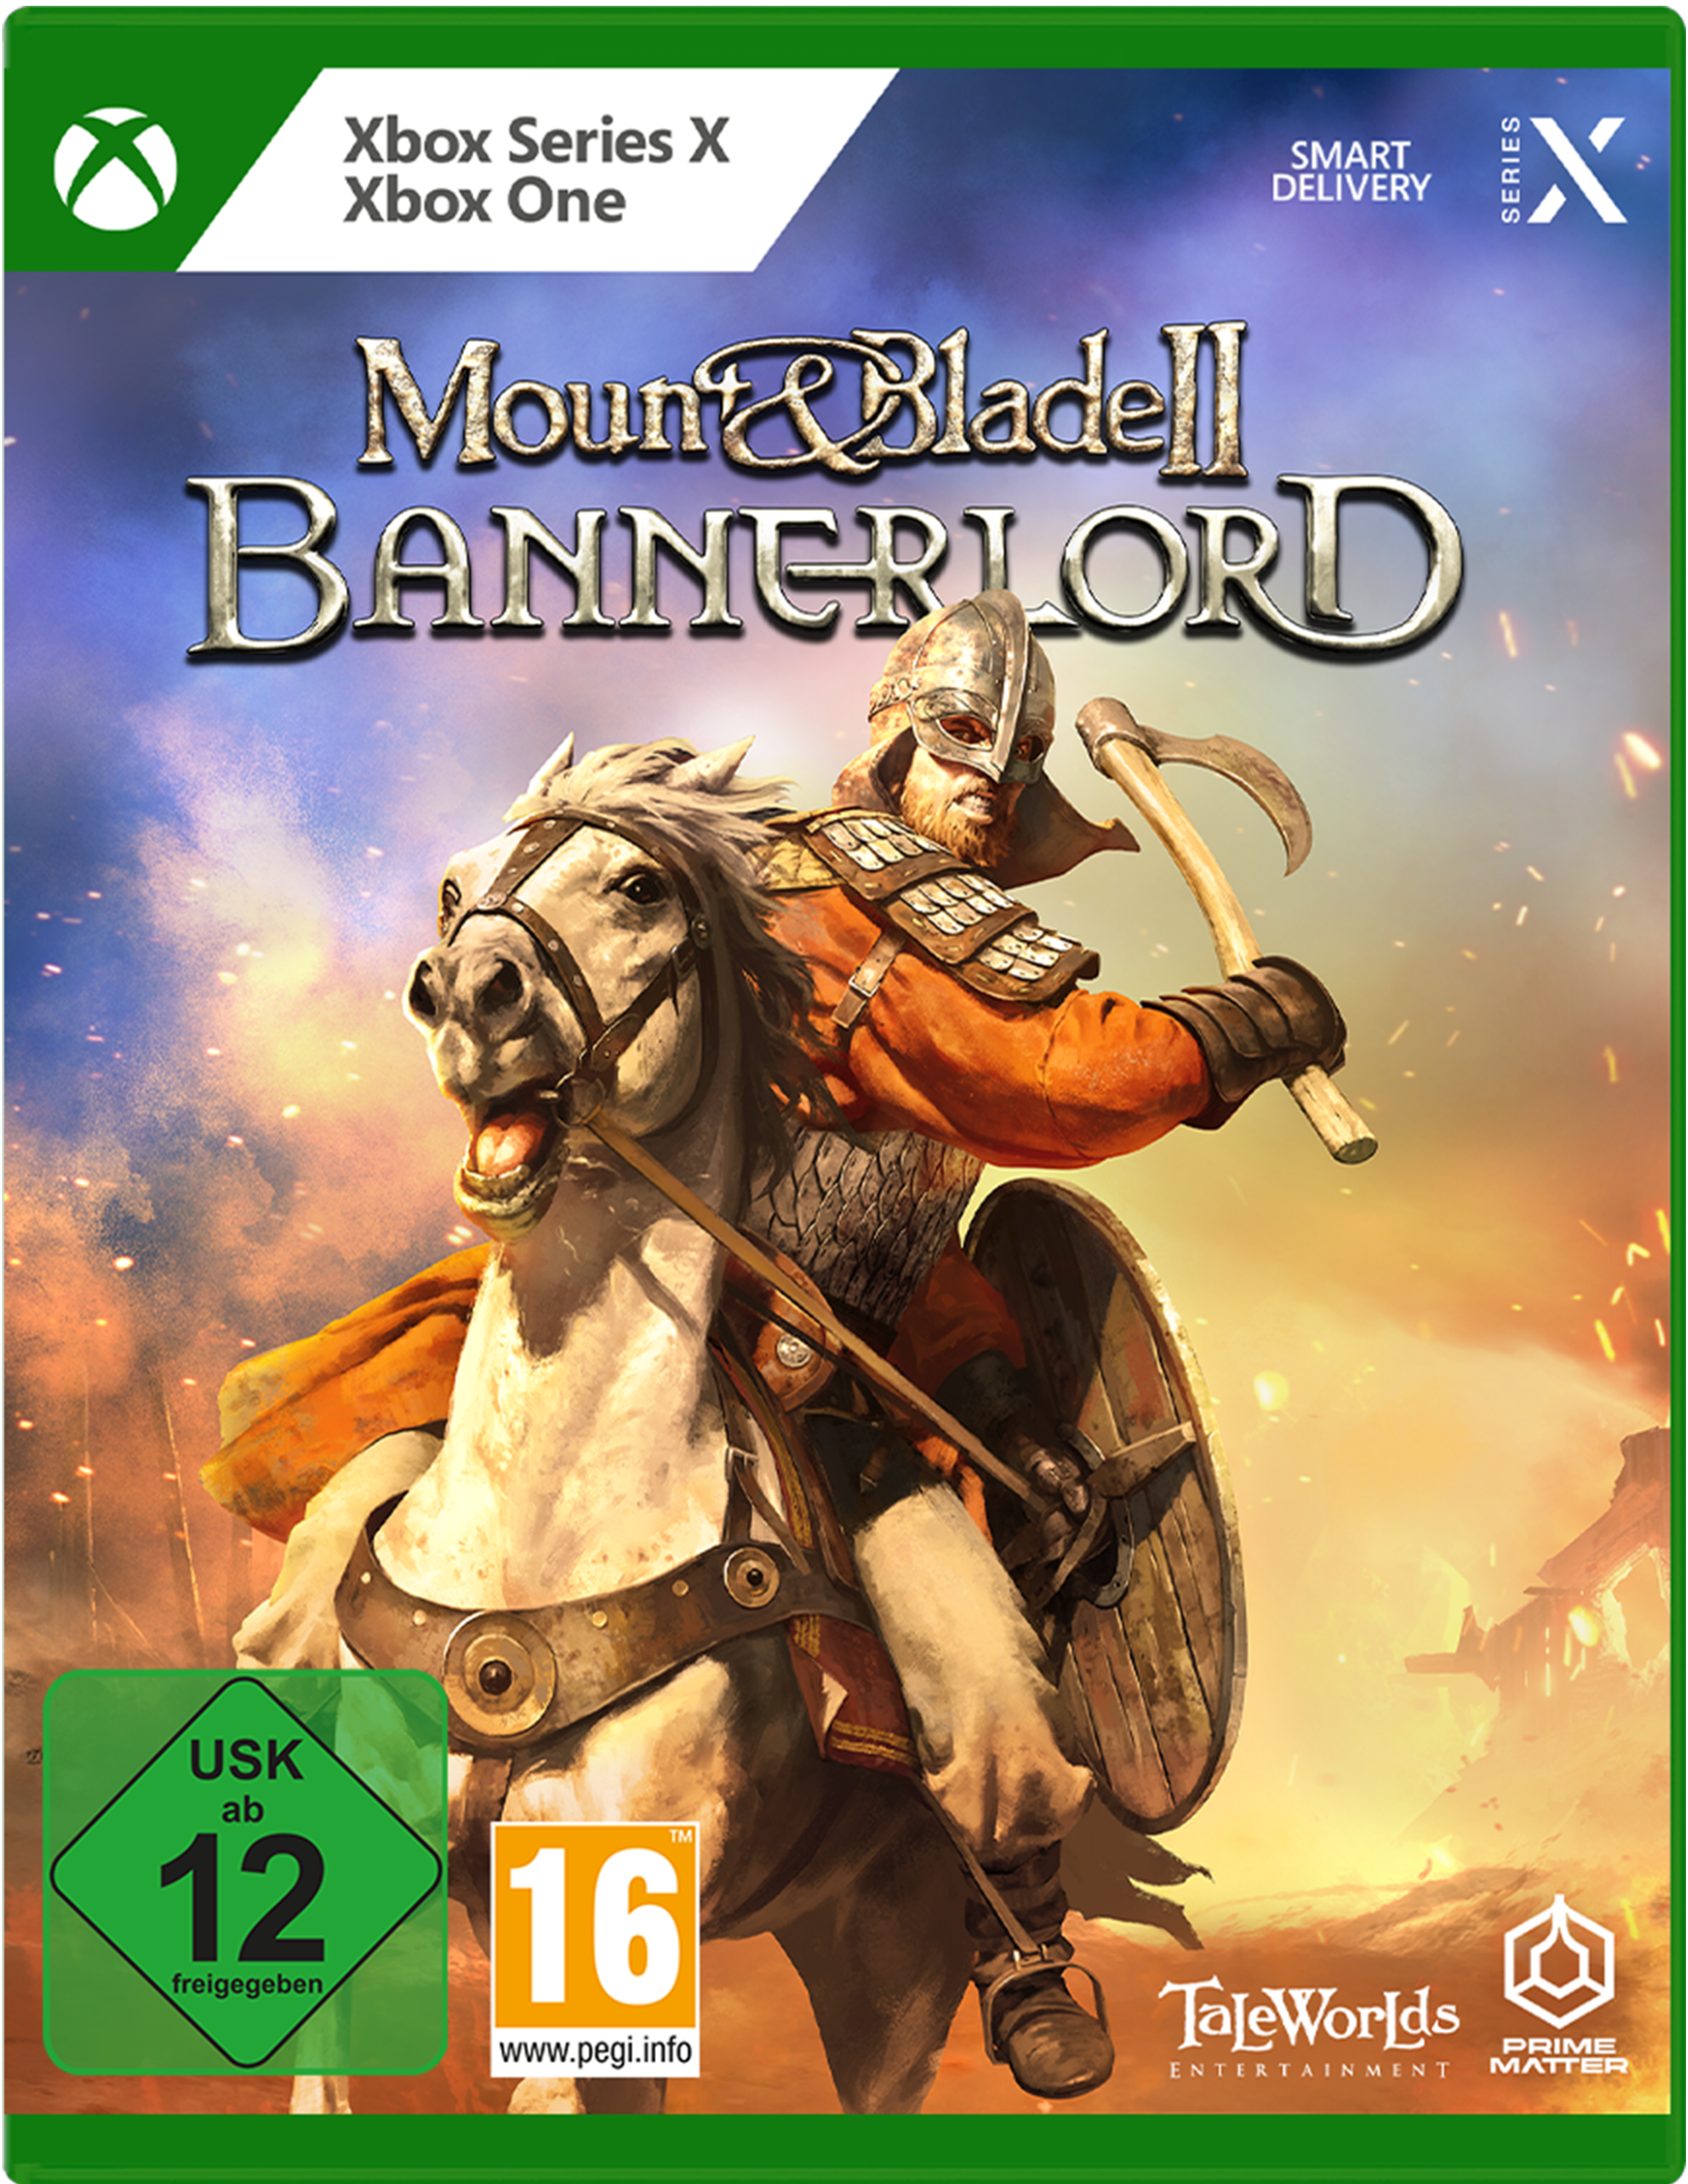 One & Series Xbox [Xbox - Blade X] & Bannerlord 2: Mount